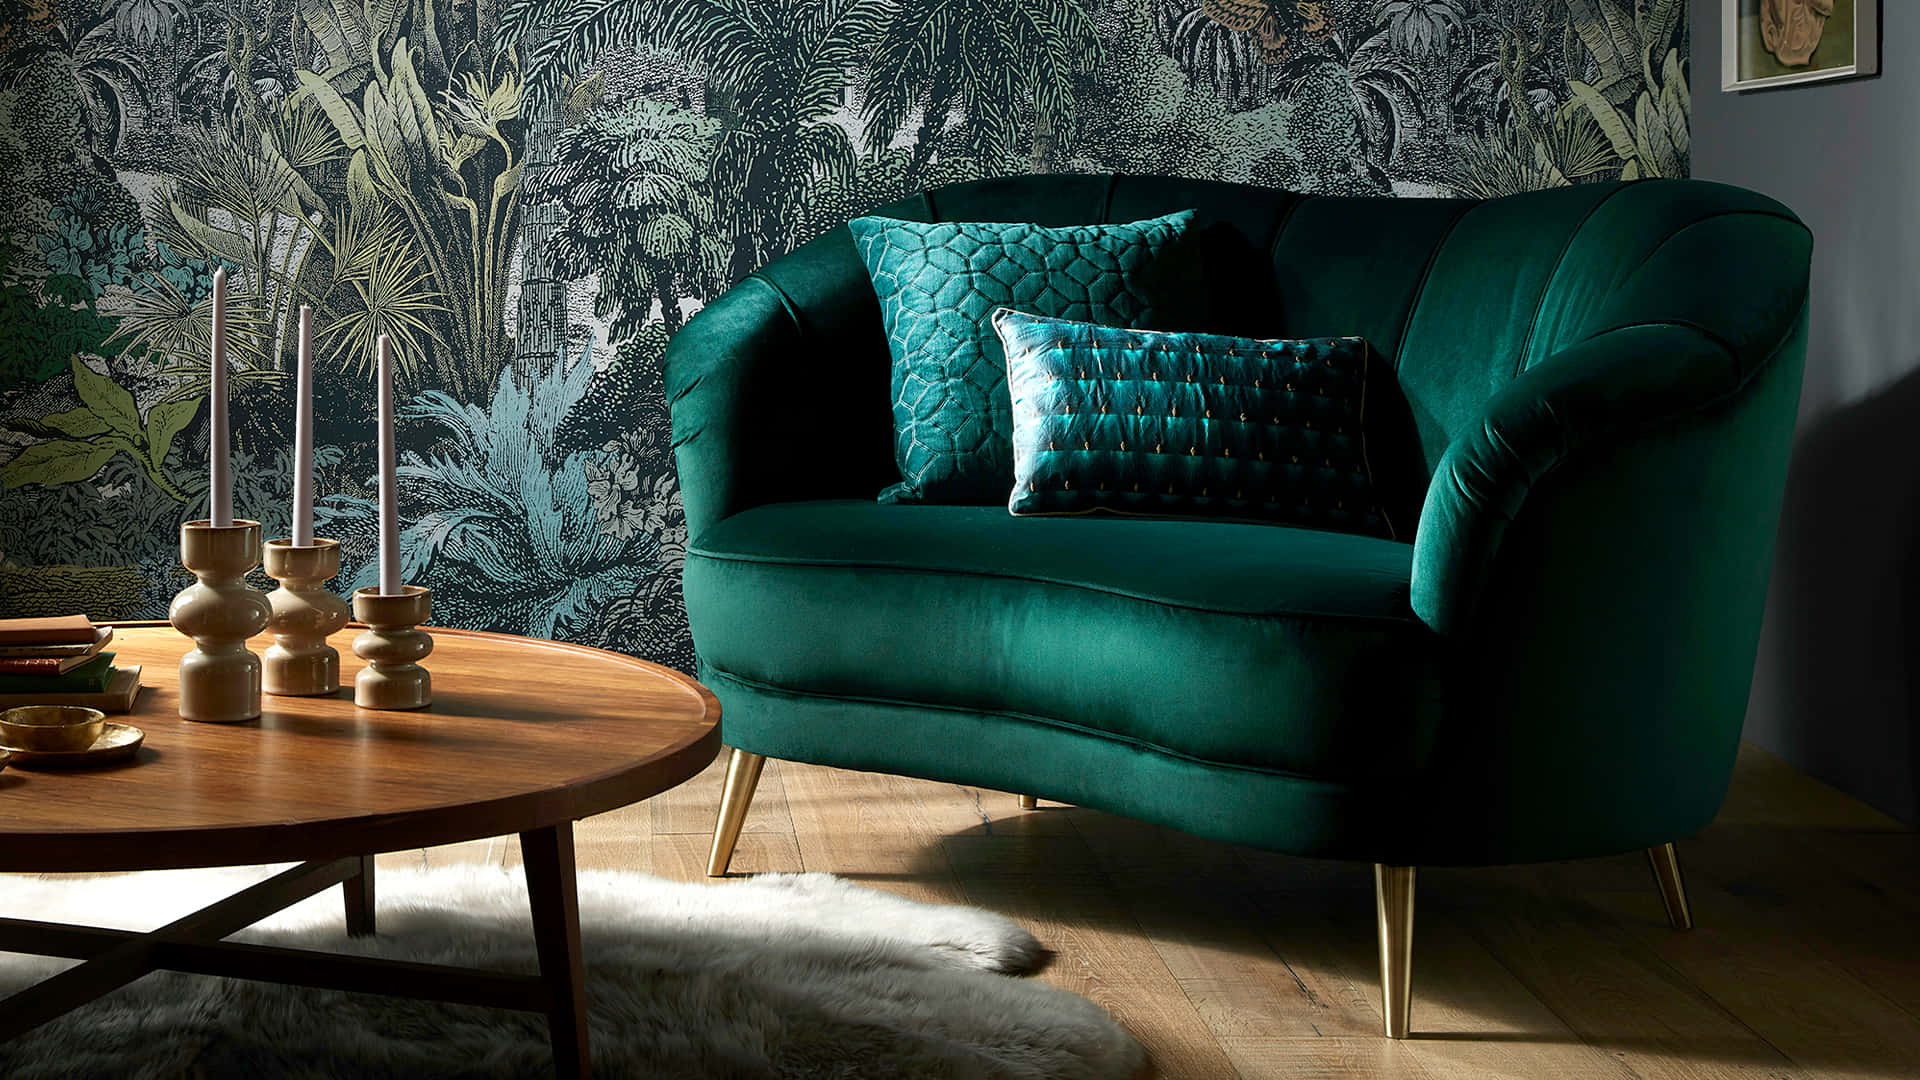 Luscious Emerald Green Couch in a Contemporary Living Space Wallpaper